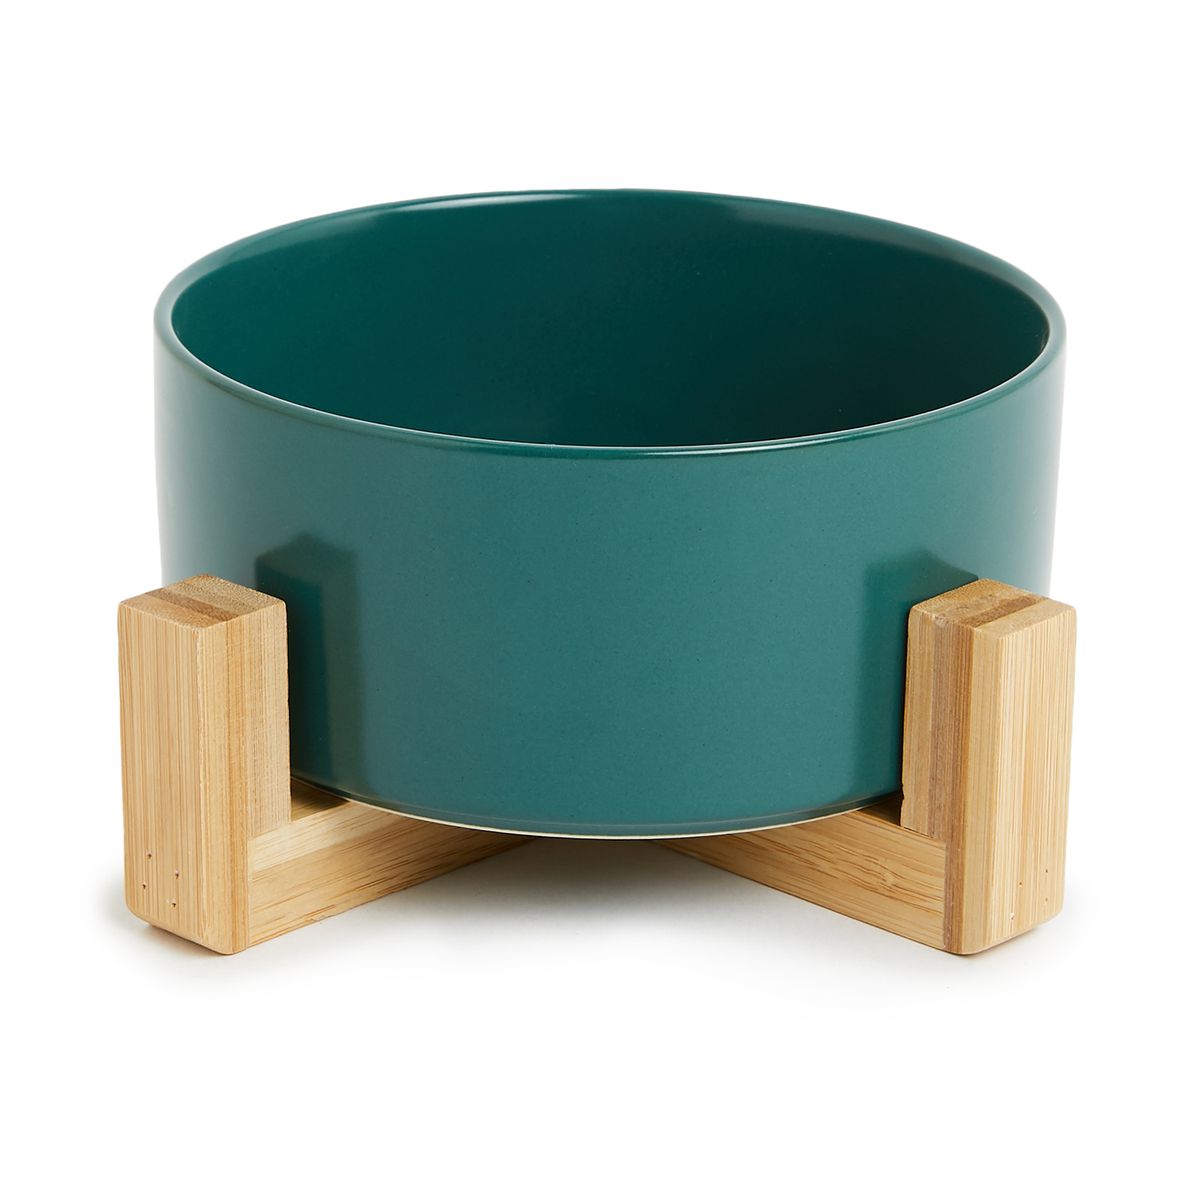 Wiggle Ceramic Bowl with Bamboo Stand | Shop Today. Get it Tomorrow ...